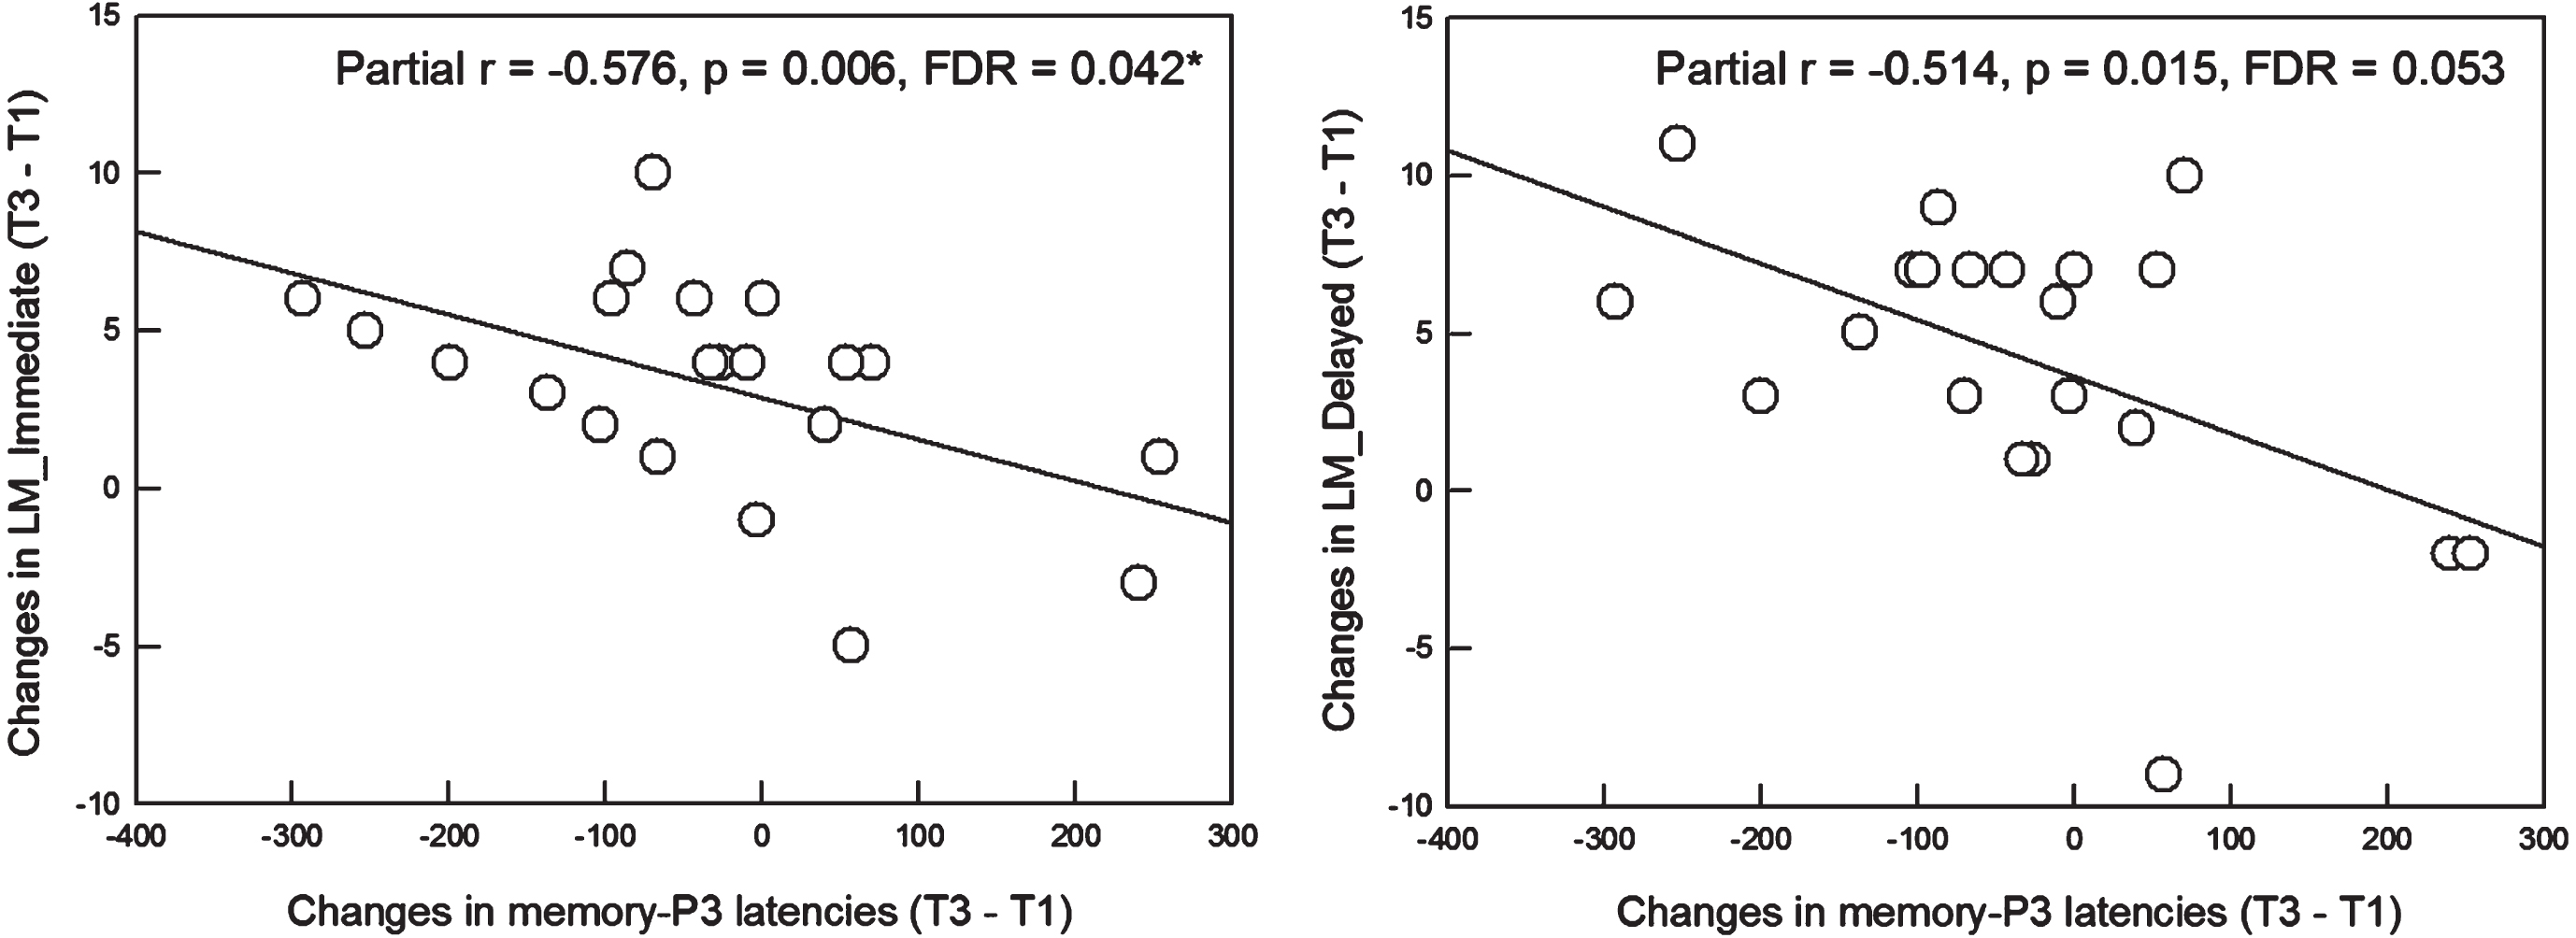 Left: Among the SCD subjects in the intervention group, more shortening of the memory-P3 latencies from T1 to T3 was significantly associated with more gains in raw scores of LM_Immediate from T1 to T3 (partial r = -0.576, p = 0.006, FDR = 0.042). Right: A similar pattern was also observed in the association between changes in memory-P3 latencies and changes in raw scores of LM_Delayed. However, the significance did not survive after the correction for multiple comparisons though a trend-level of significance (p = 0.015, FDR = 0.053) was detected. SCD, subjective cognitive decline; LM, Logic Memory Test Part A of the Wechsler Memory Scale; FDR, false discovery rate.